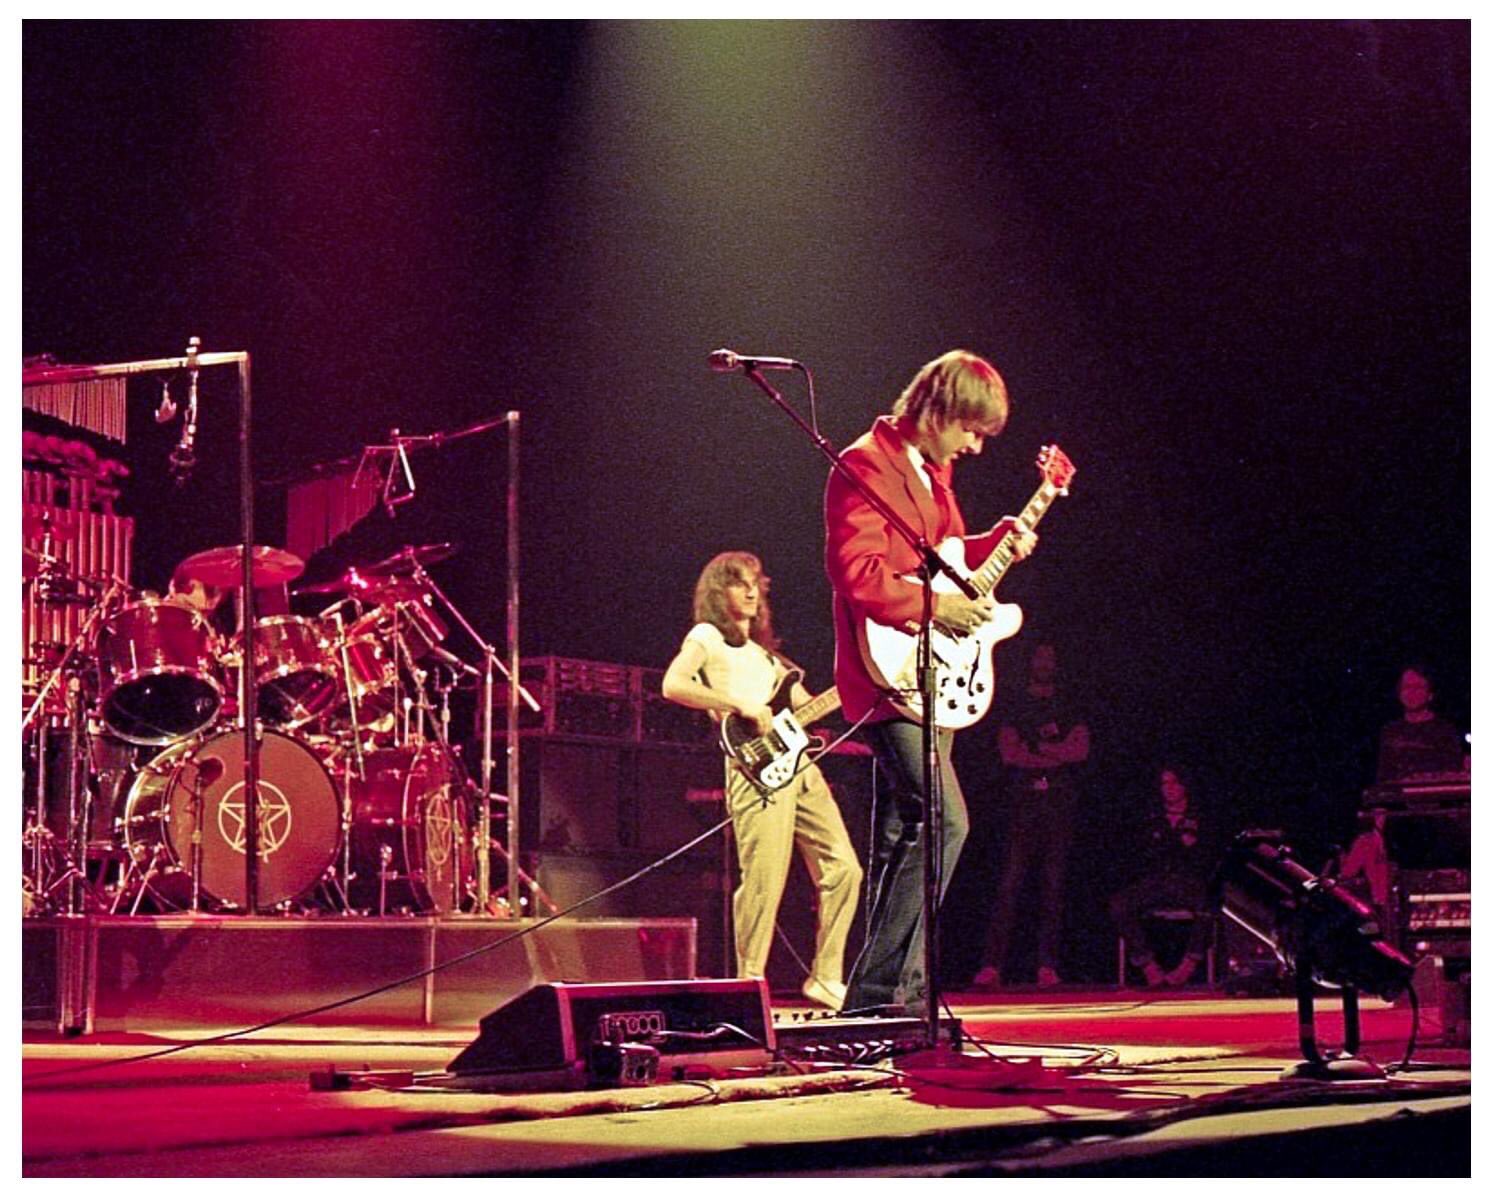 Happy 67th Birthday to the legend Geddy Lee, seen here rocking with at Cobo Arena in March 1981 